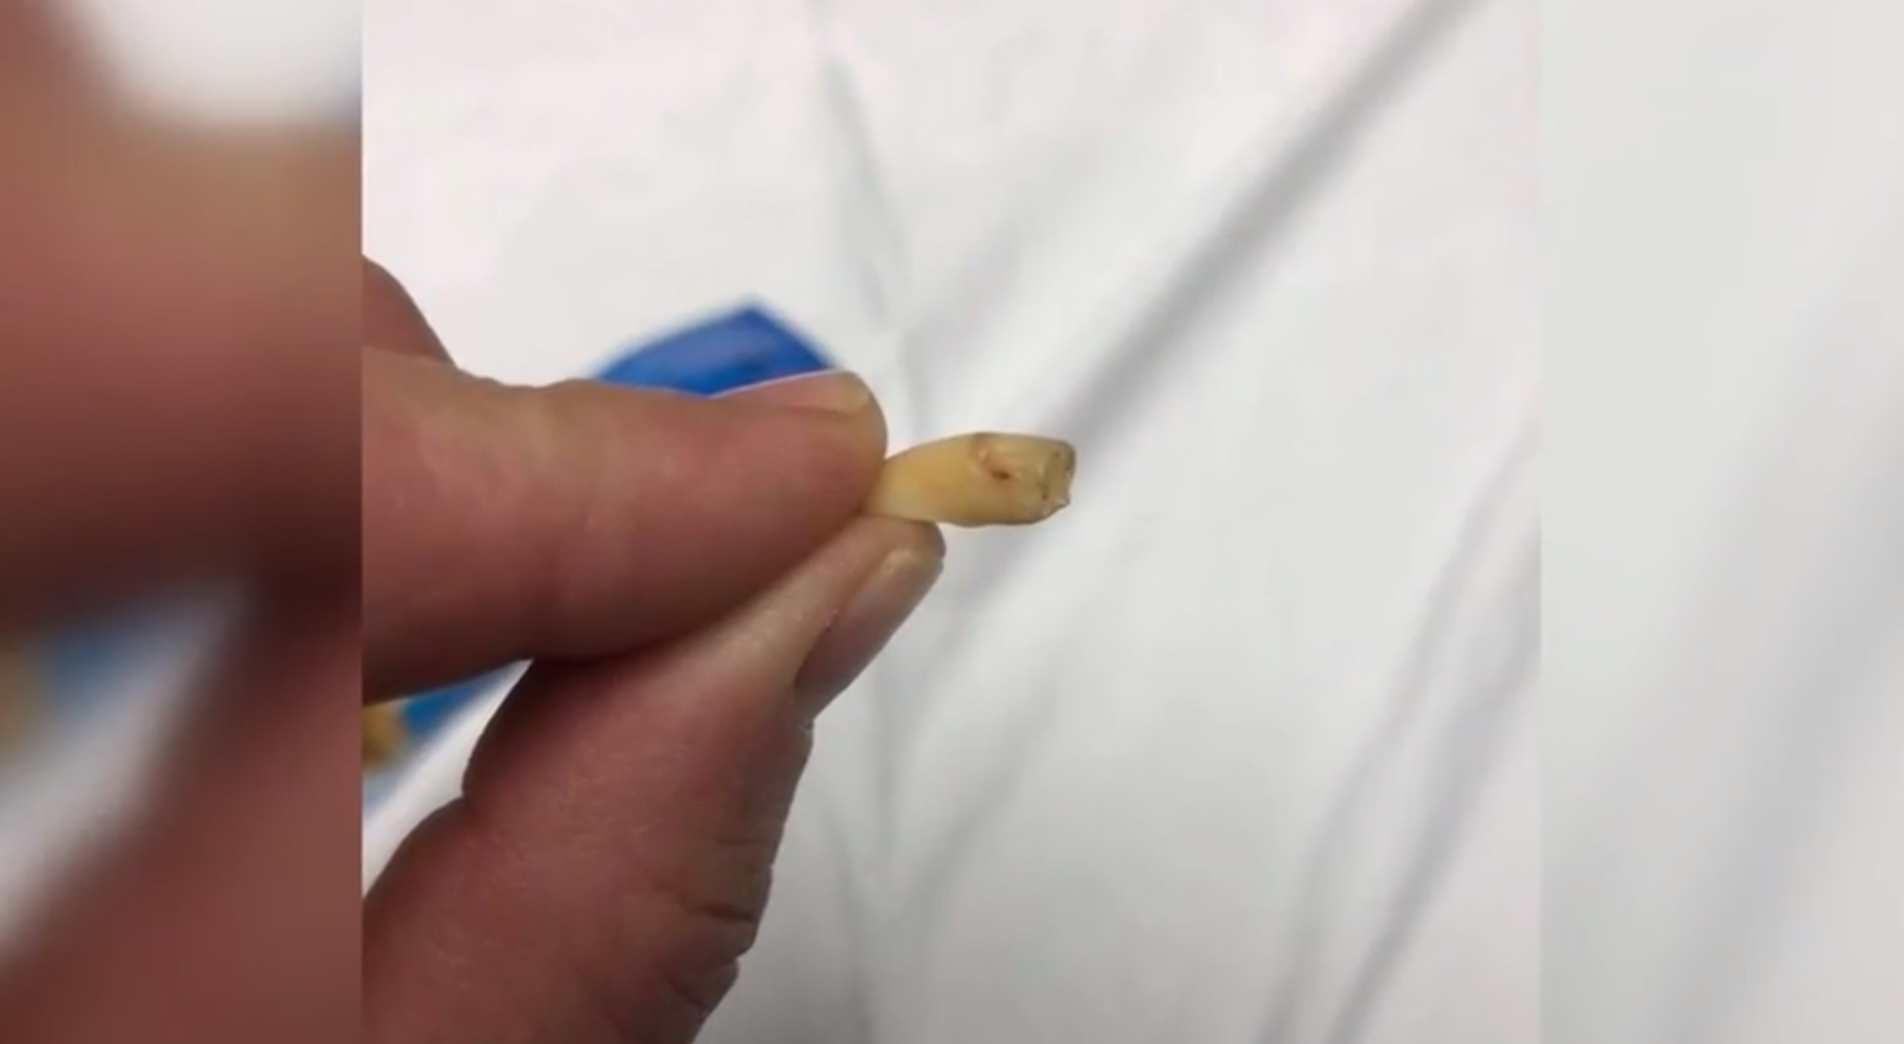 Woman says she found bloody human tooth while eating cashews